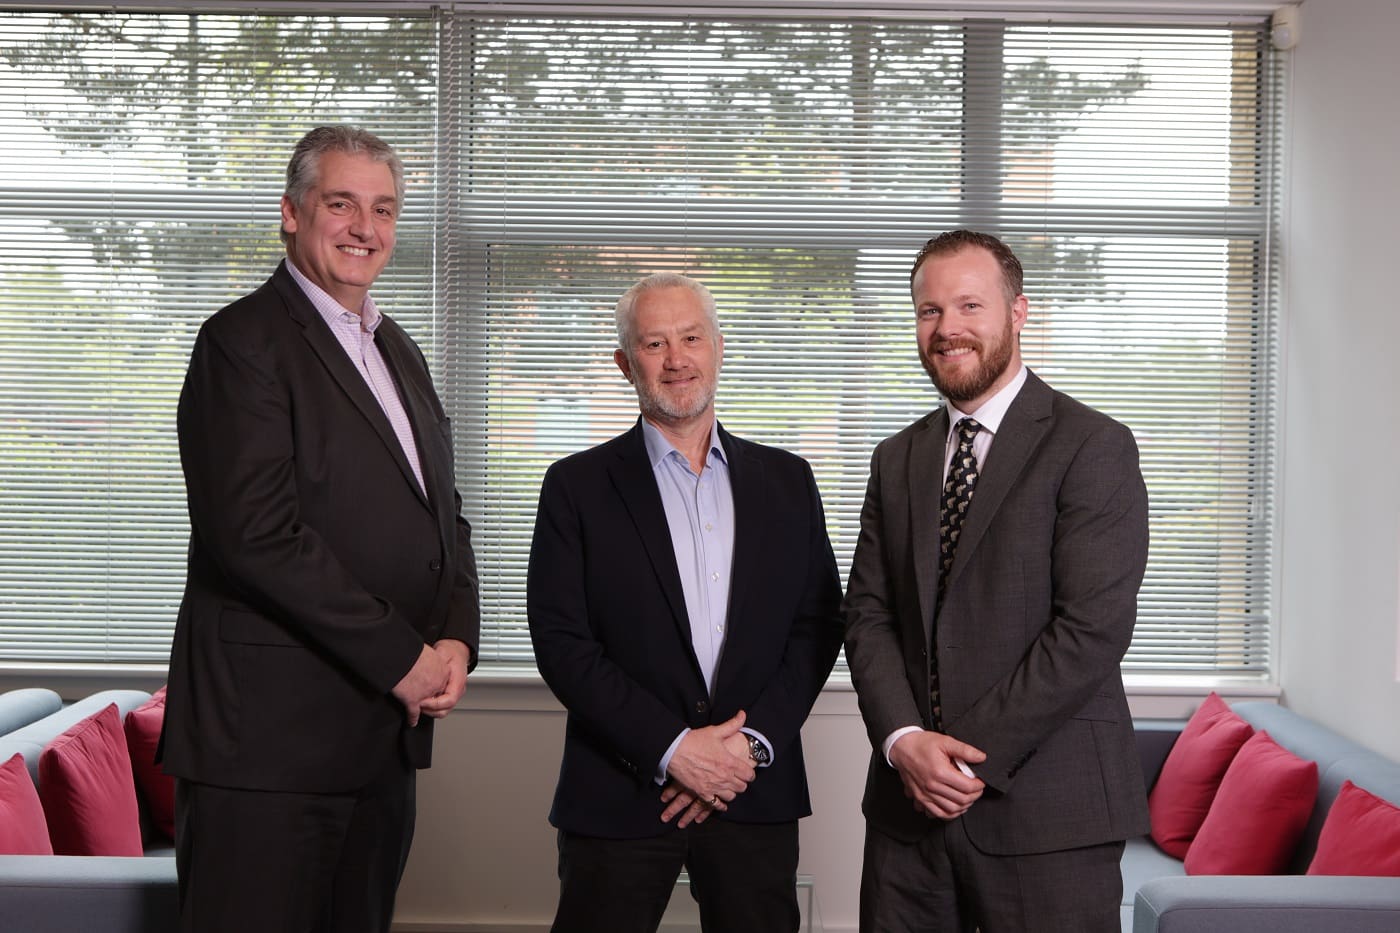 Martin Clapson, Managing Director, Greg Mayne, VAT Partner and Rich Grimster standing in office smiling